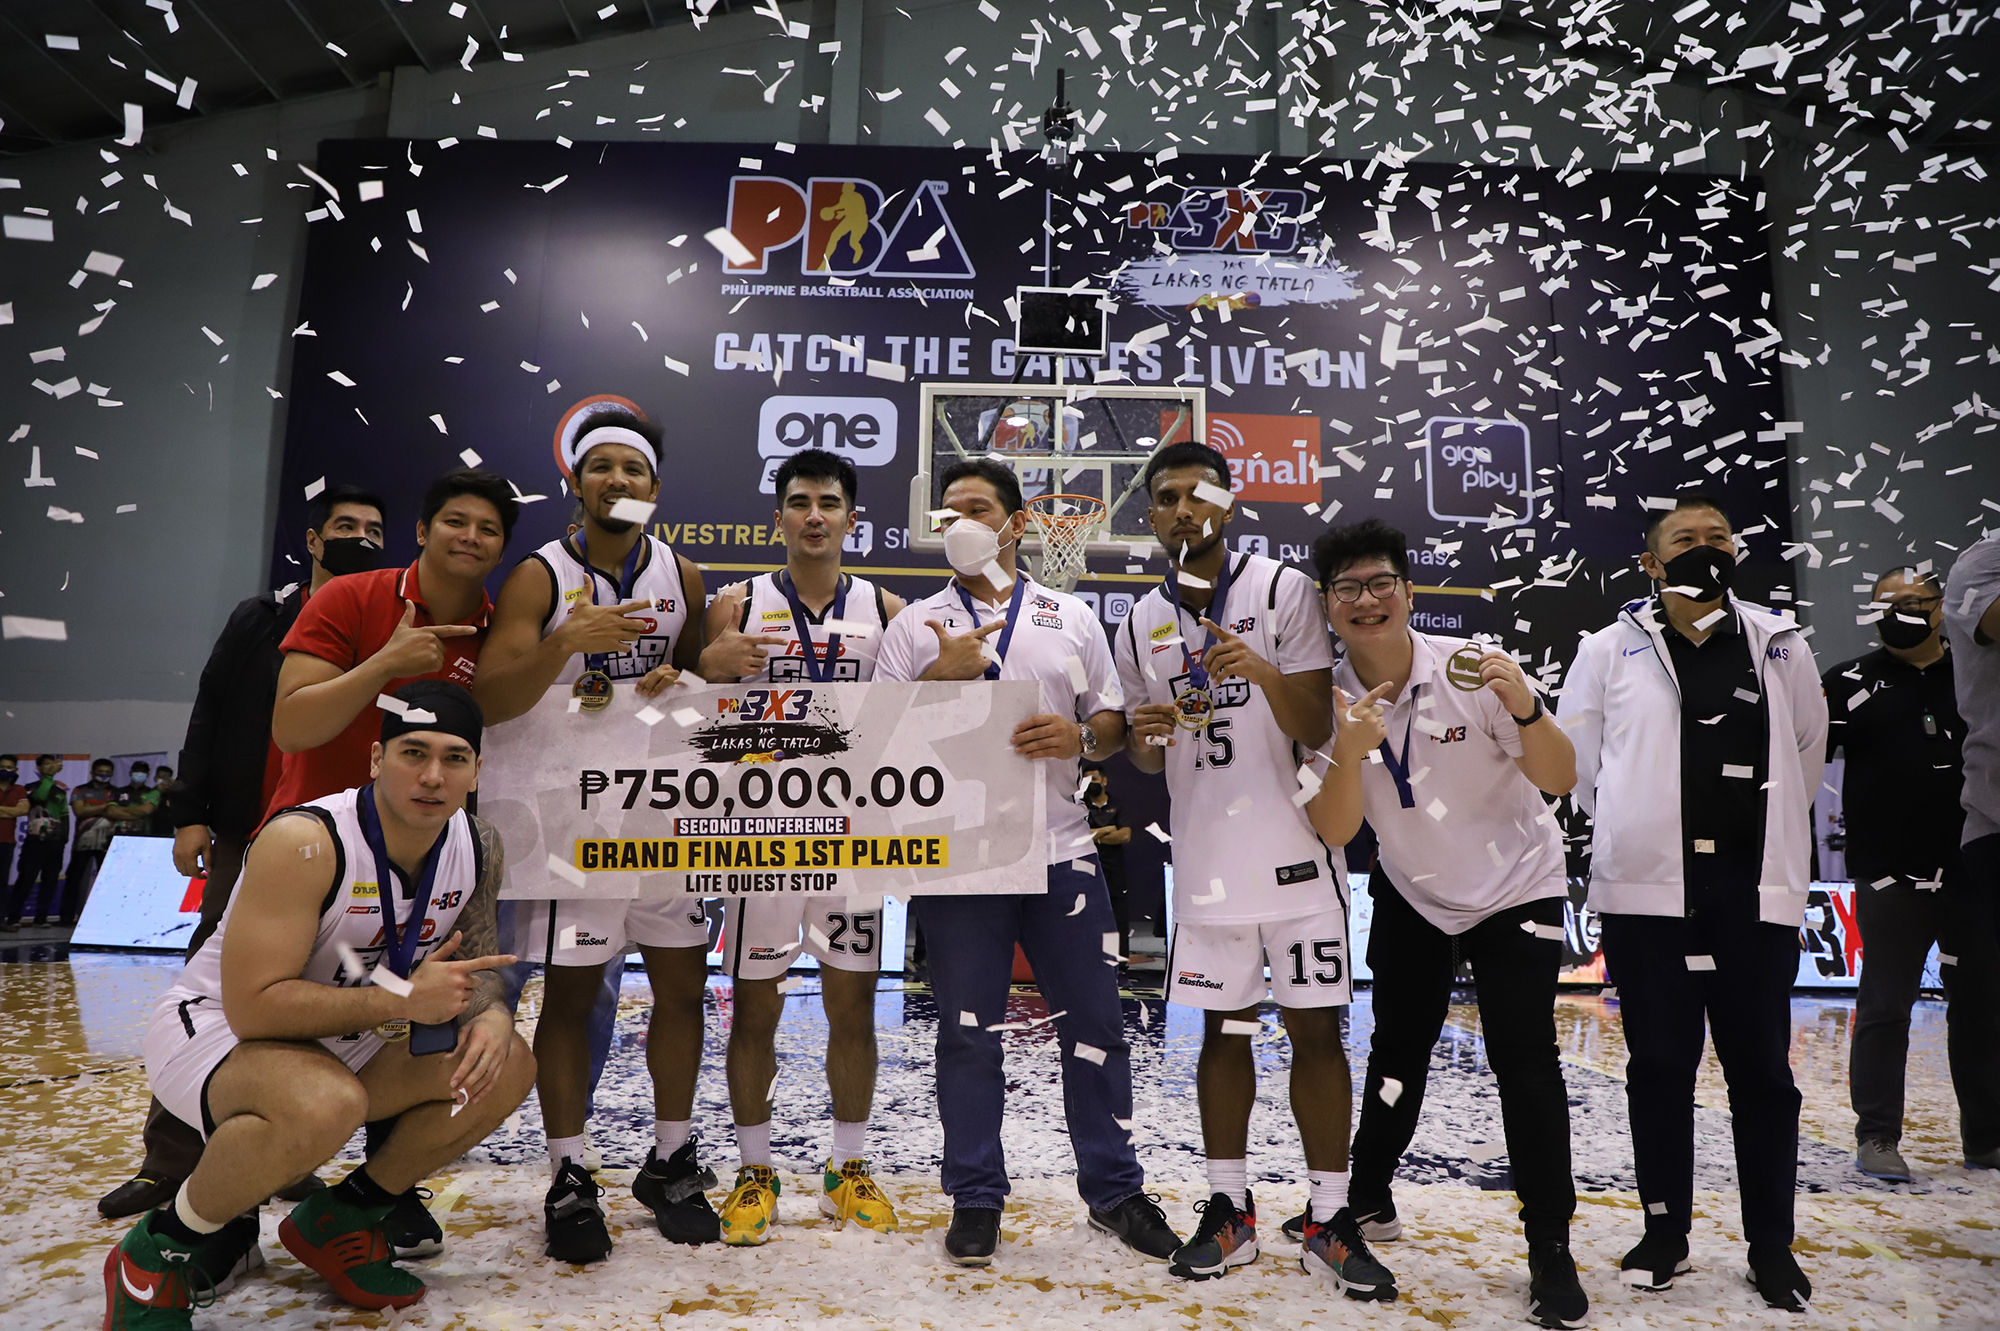 PBA 3x3 second conference Grand Finals champion Pioneer. PBA IMAGES